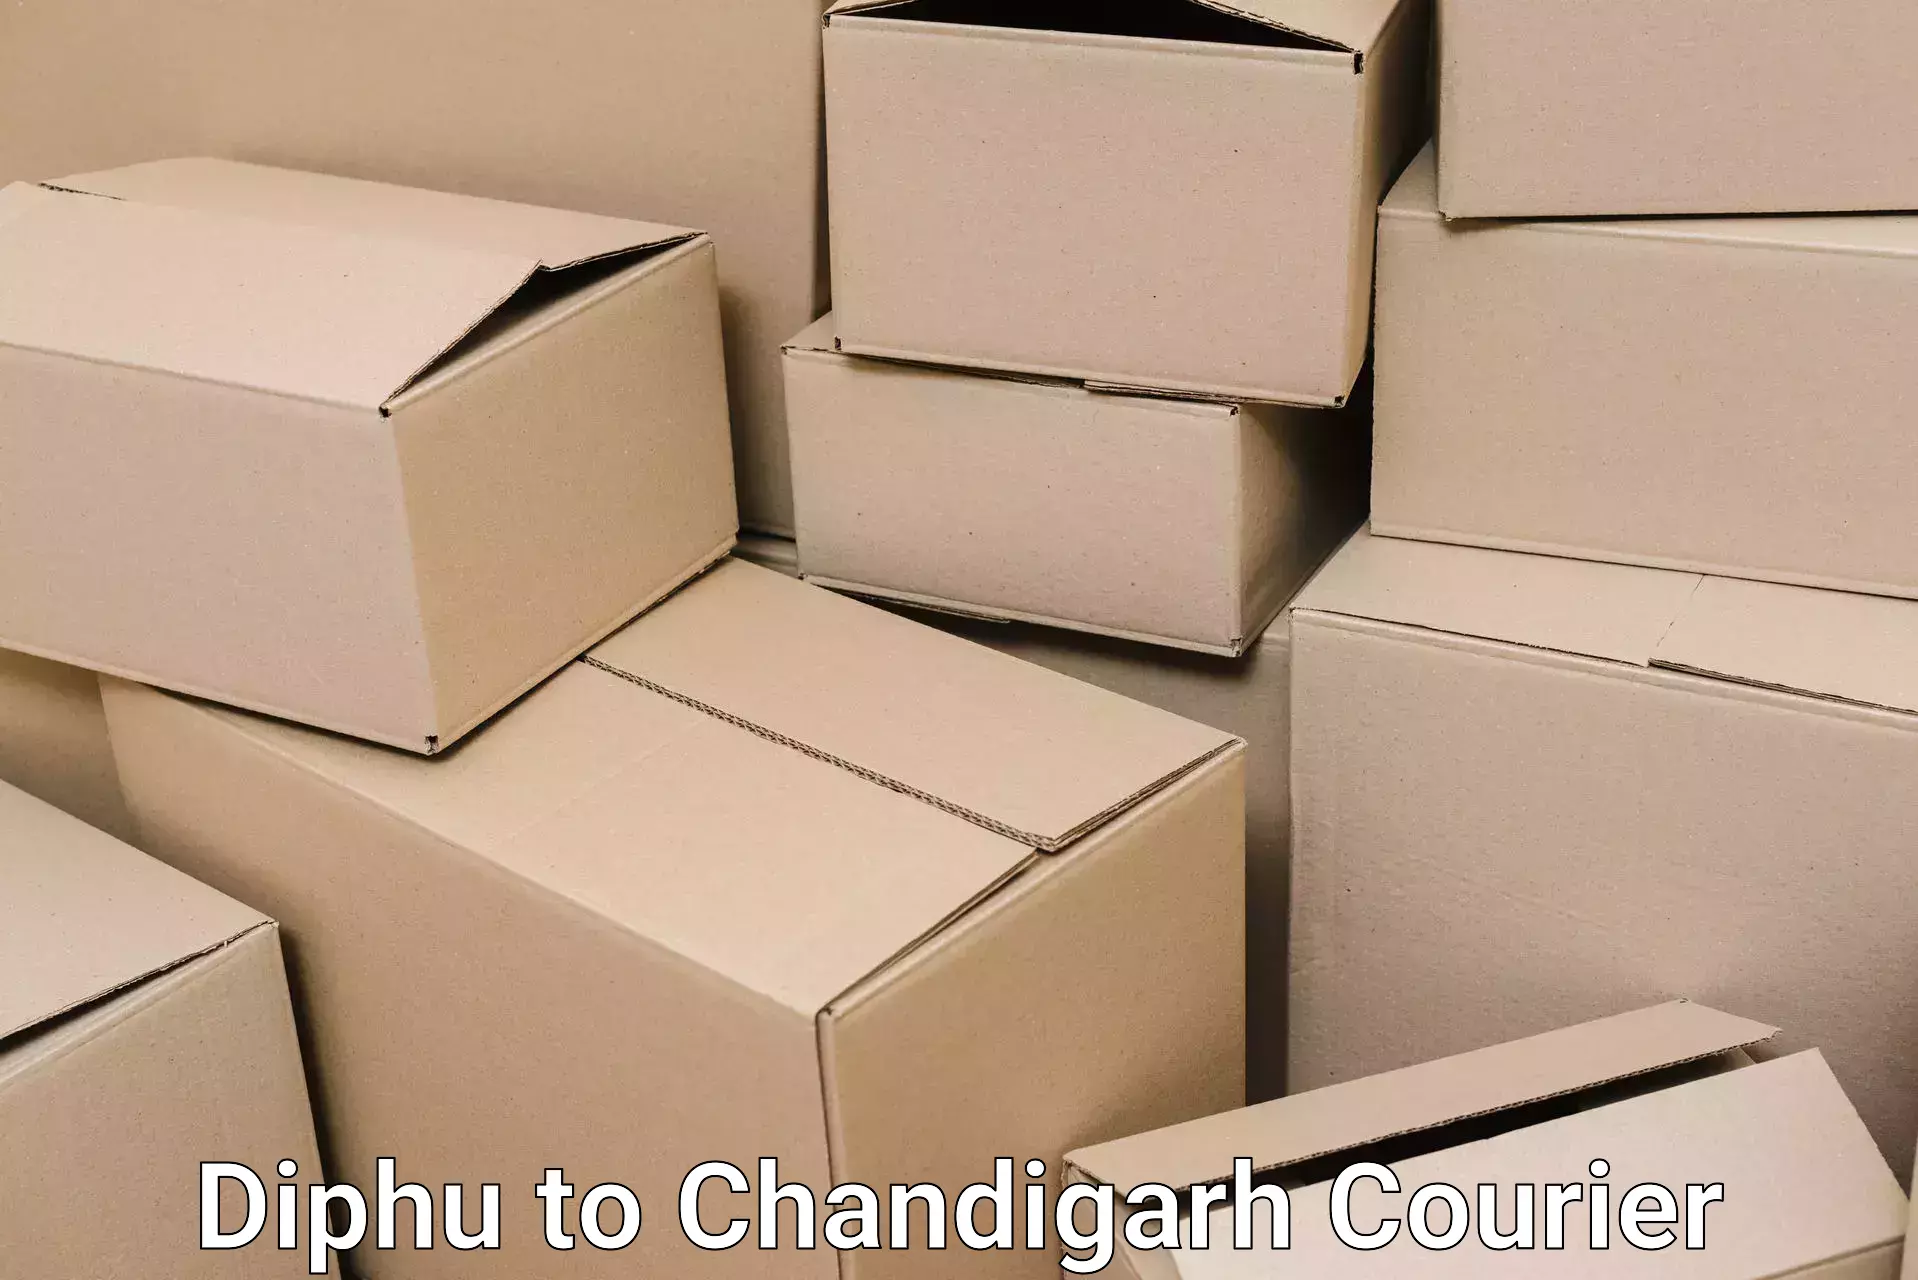 Professional moving company Diphu to Chandigarh